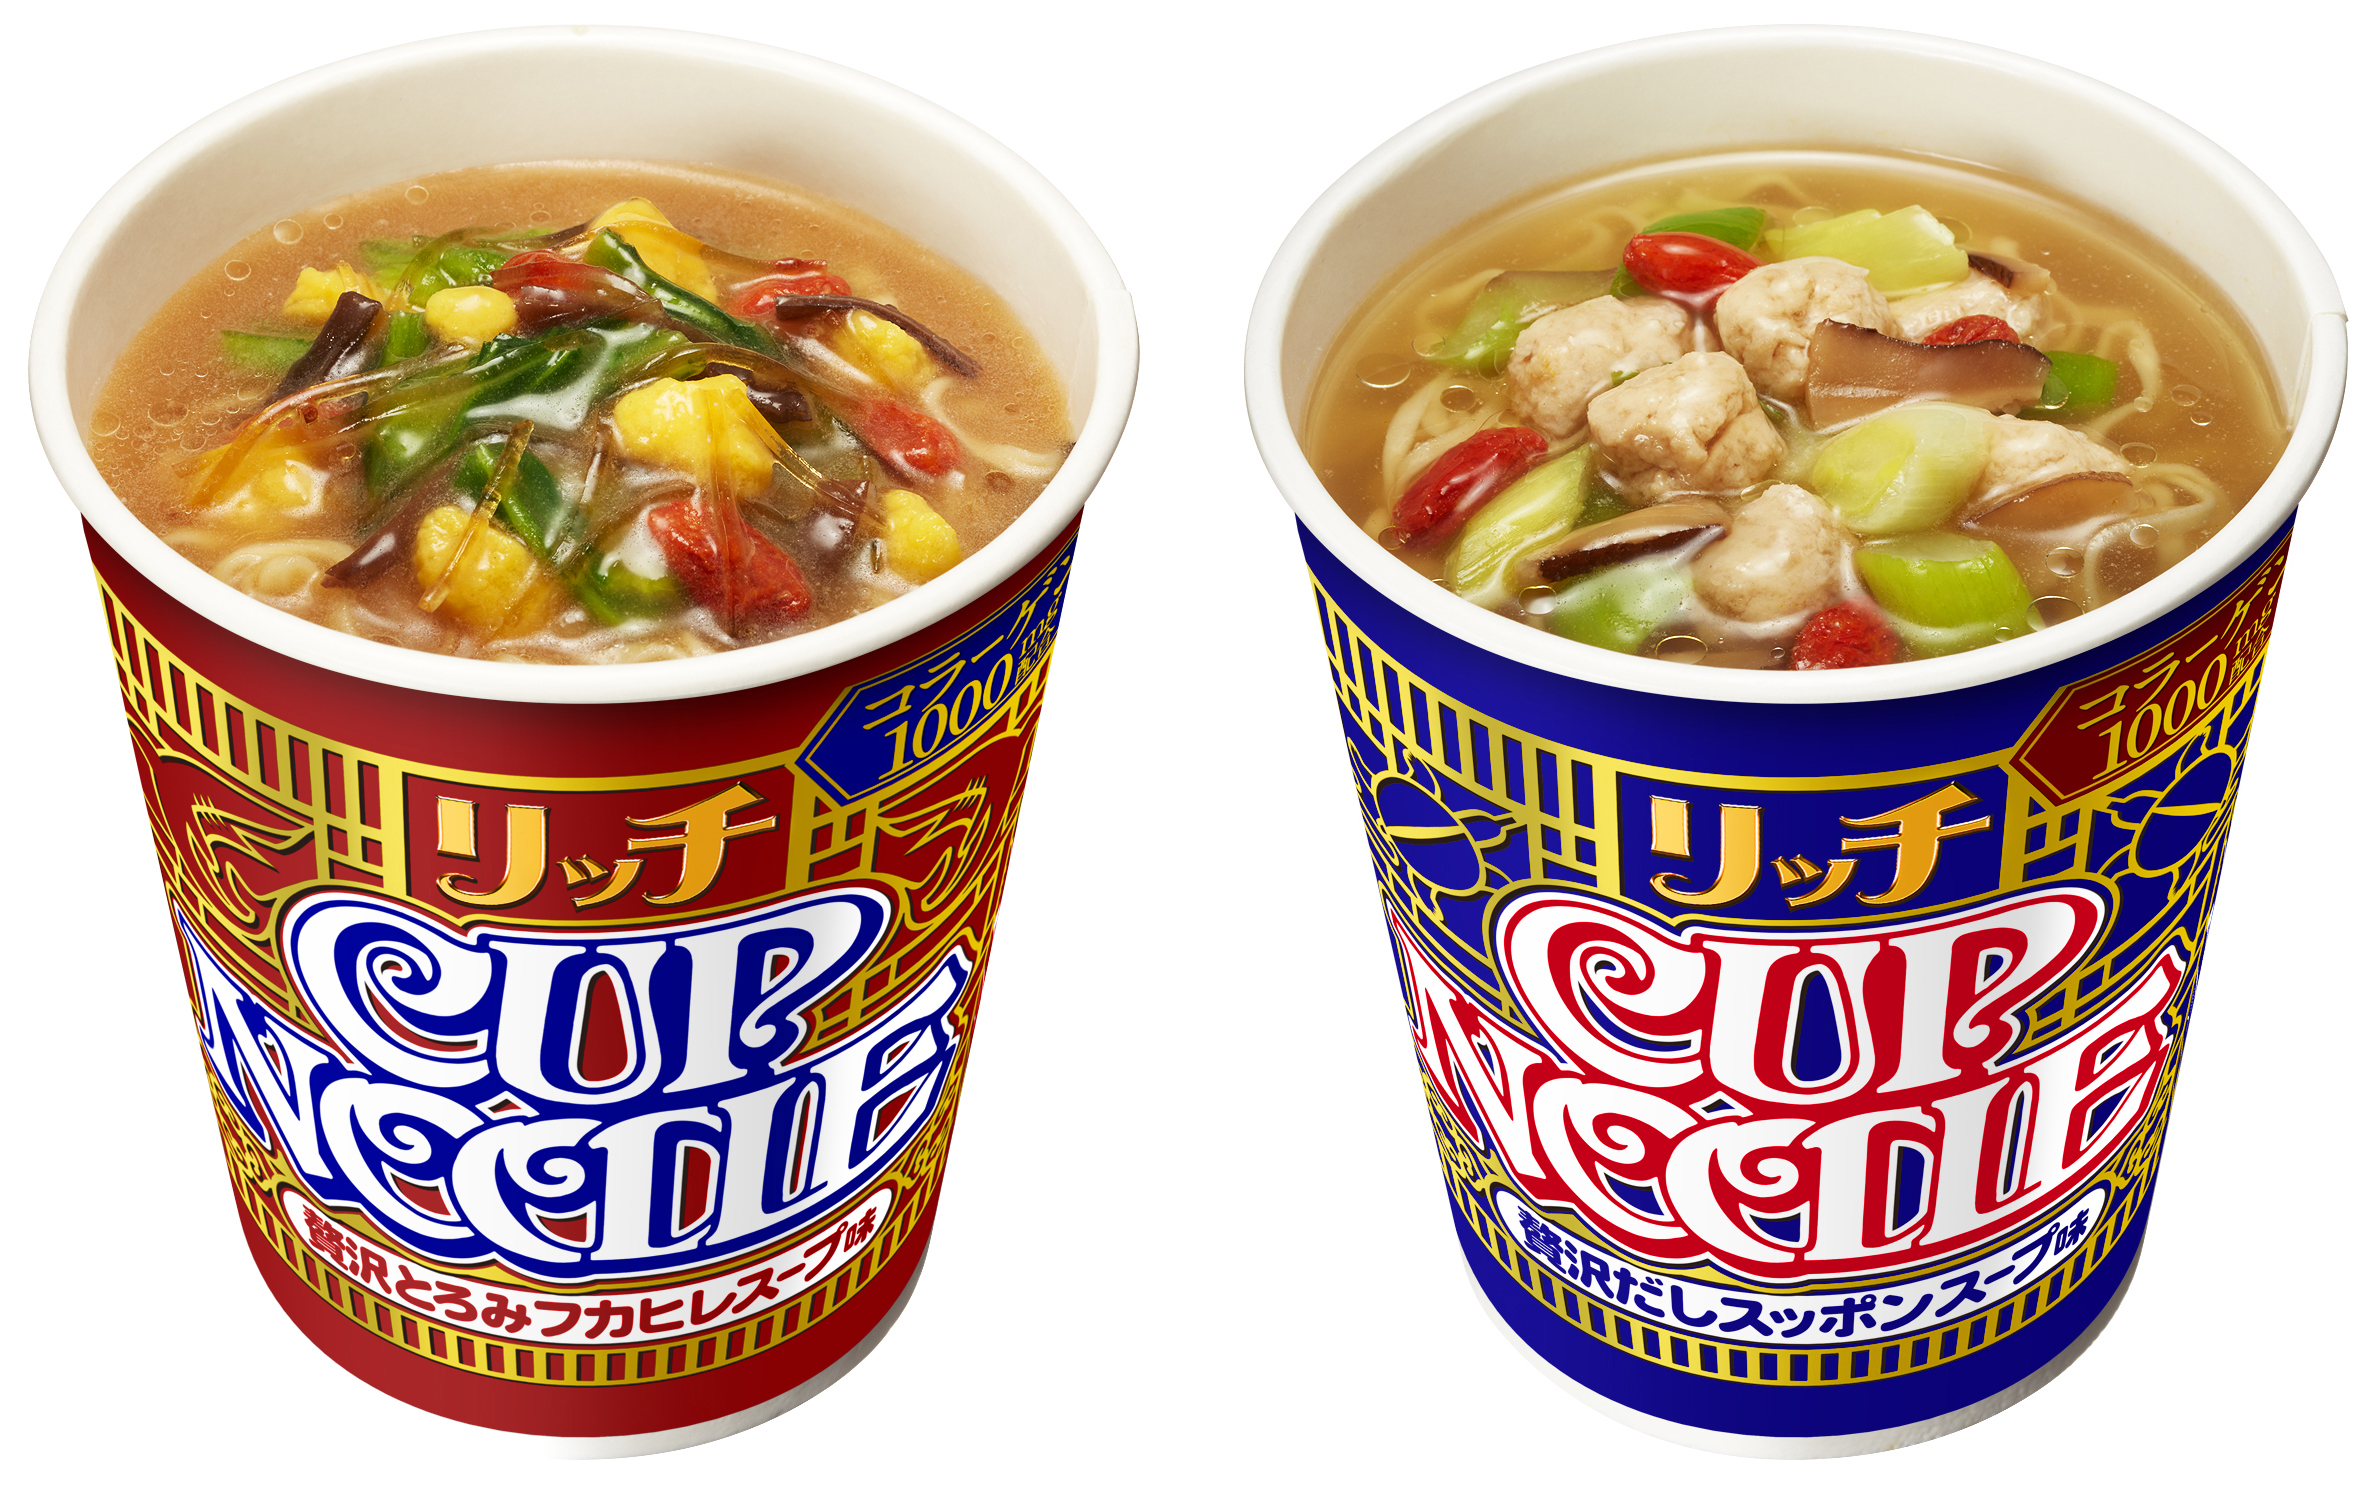 Nissin to debut premium Cup Noodle Rich line in Japan | The Japan Times2380 x 1492